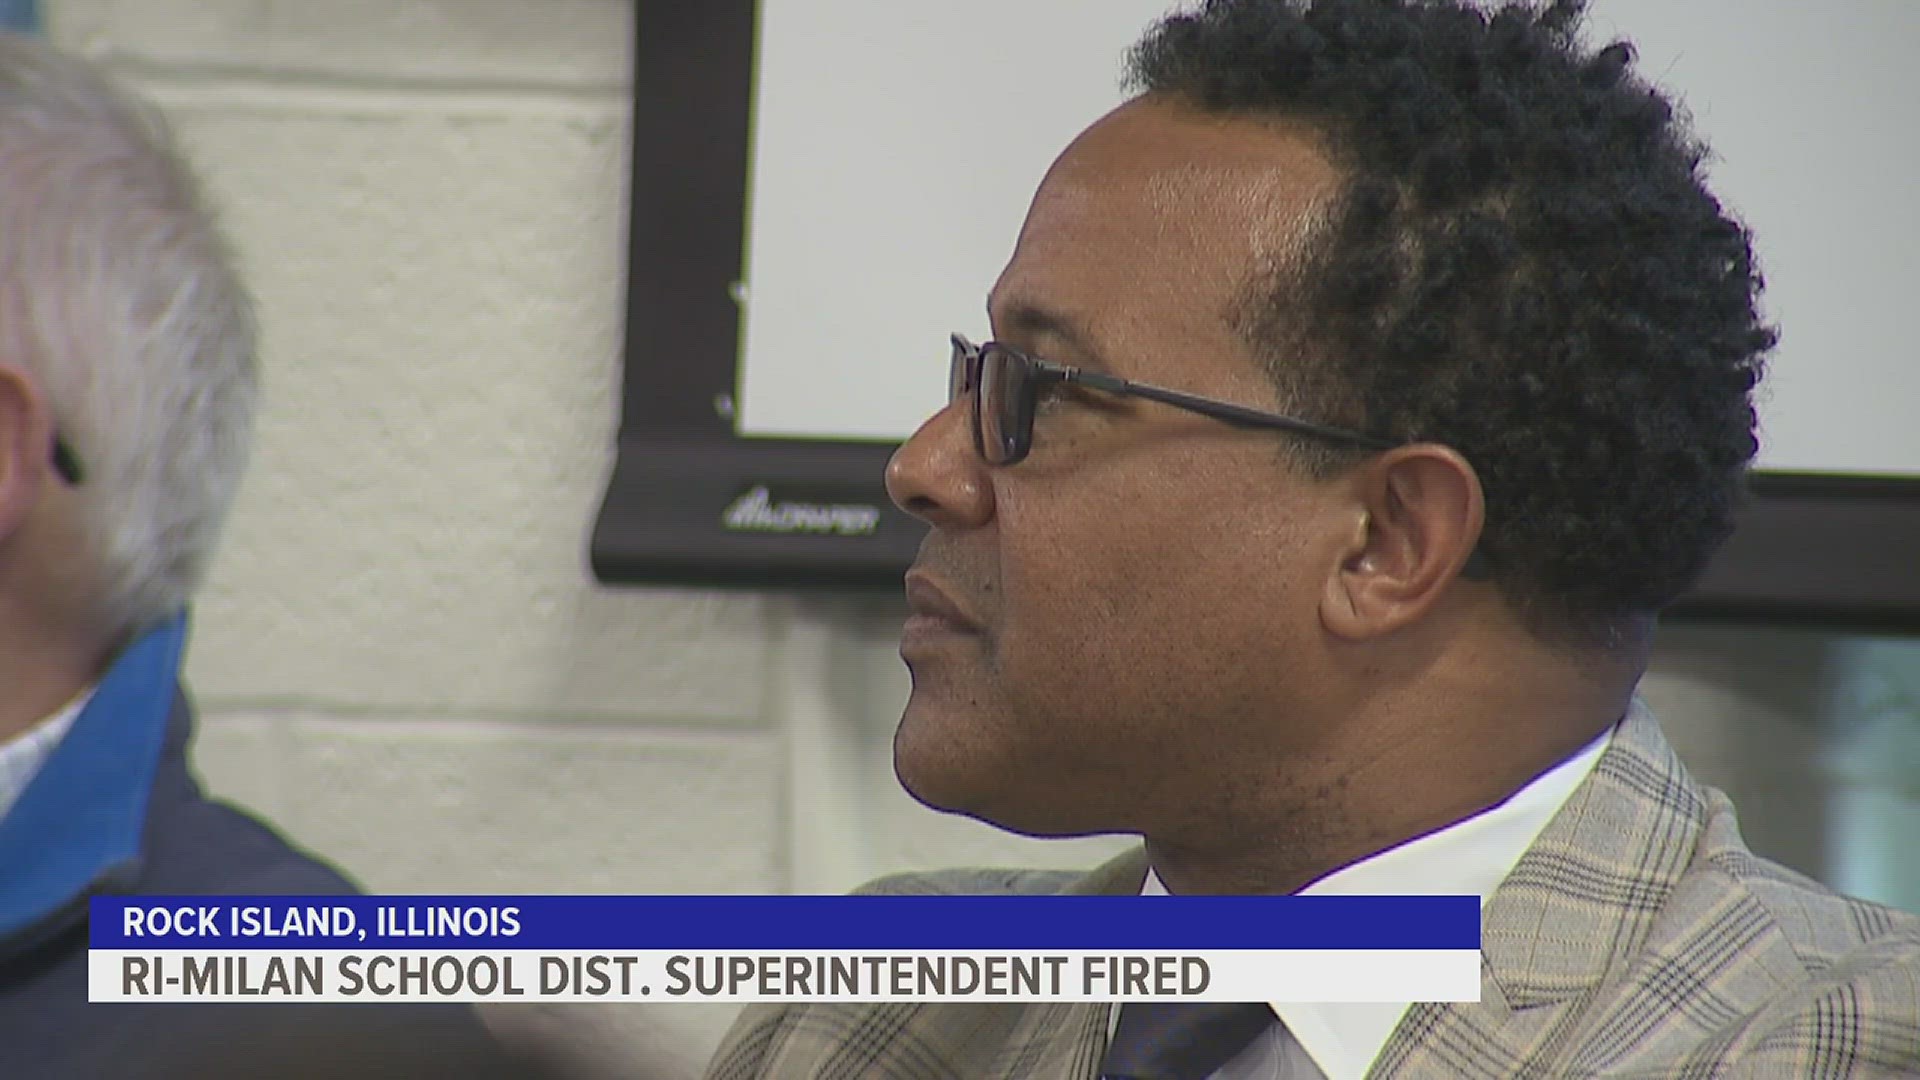 The school board agreed to pay superintendent Dr. Reginald Lawrence $350,000 for the breach of contract. His contract will end on June 3rd.